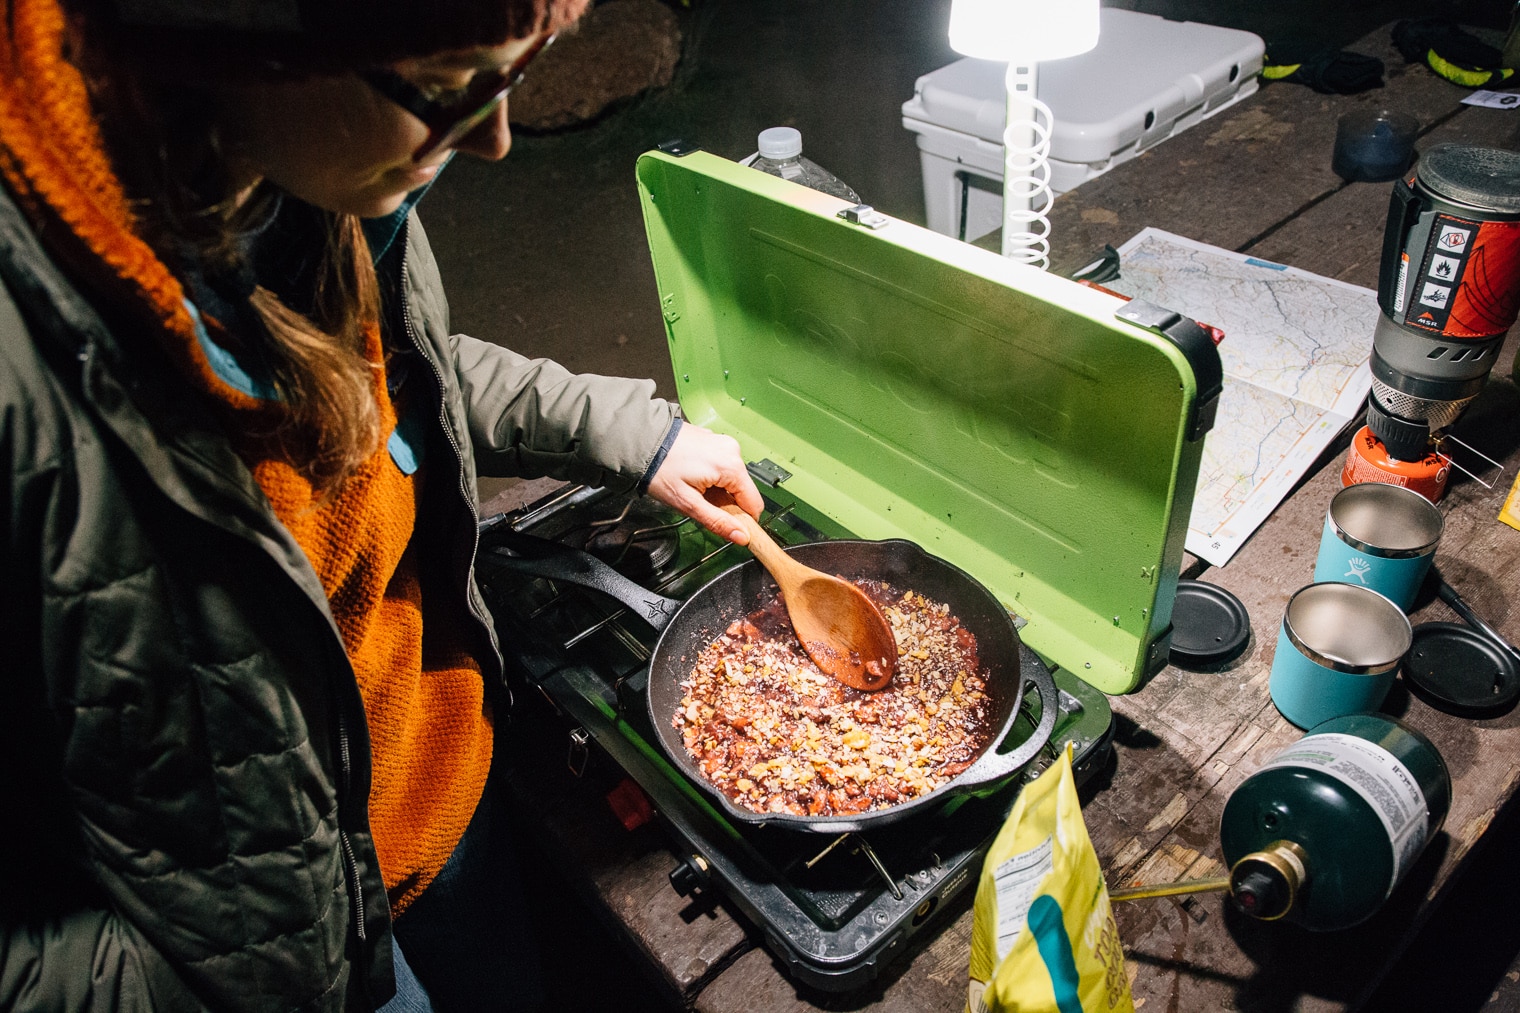 Megan cooking desert on a camp stove